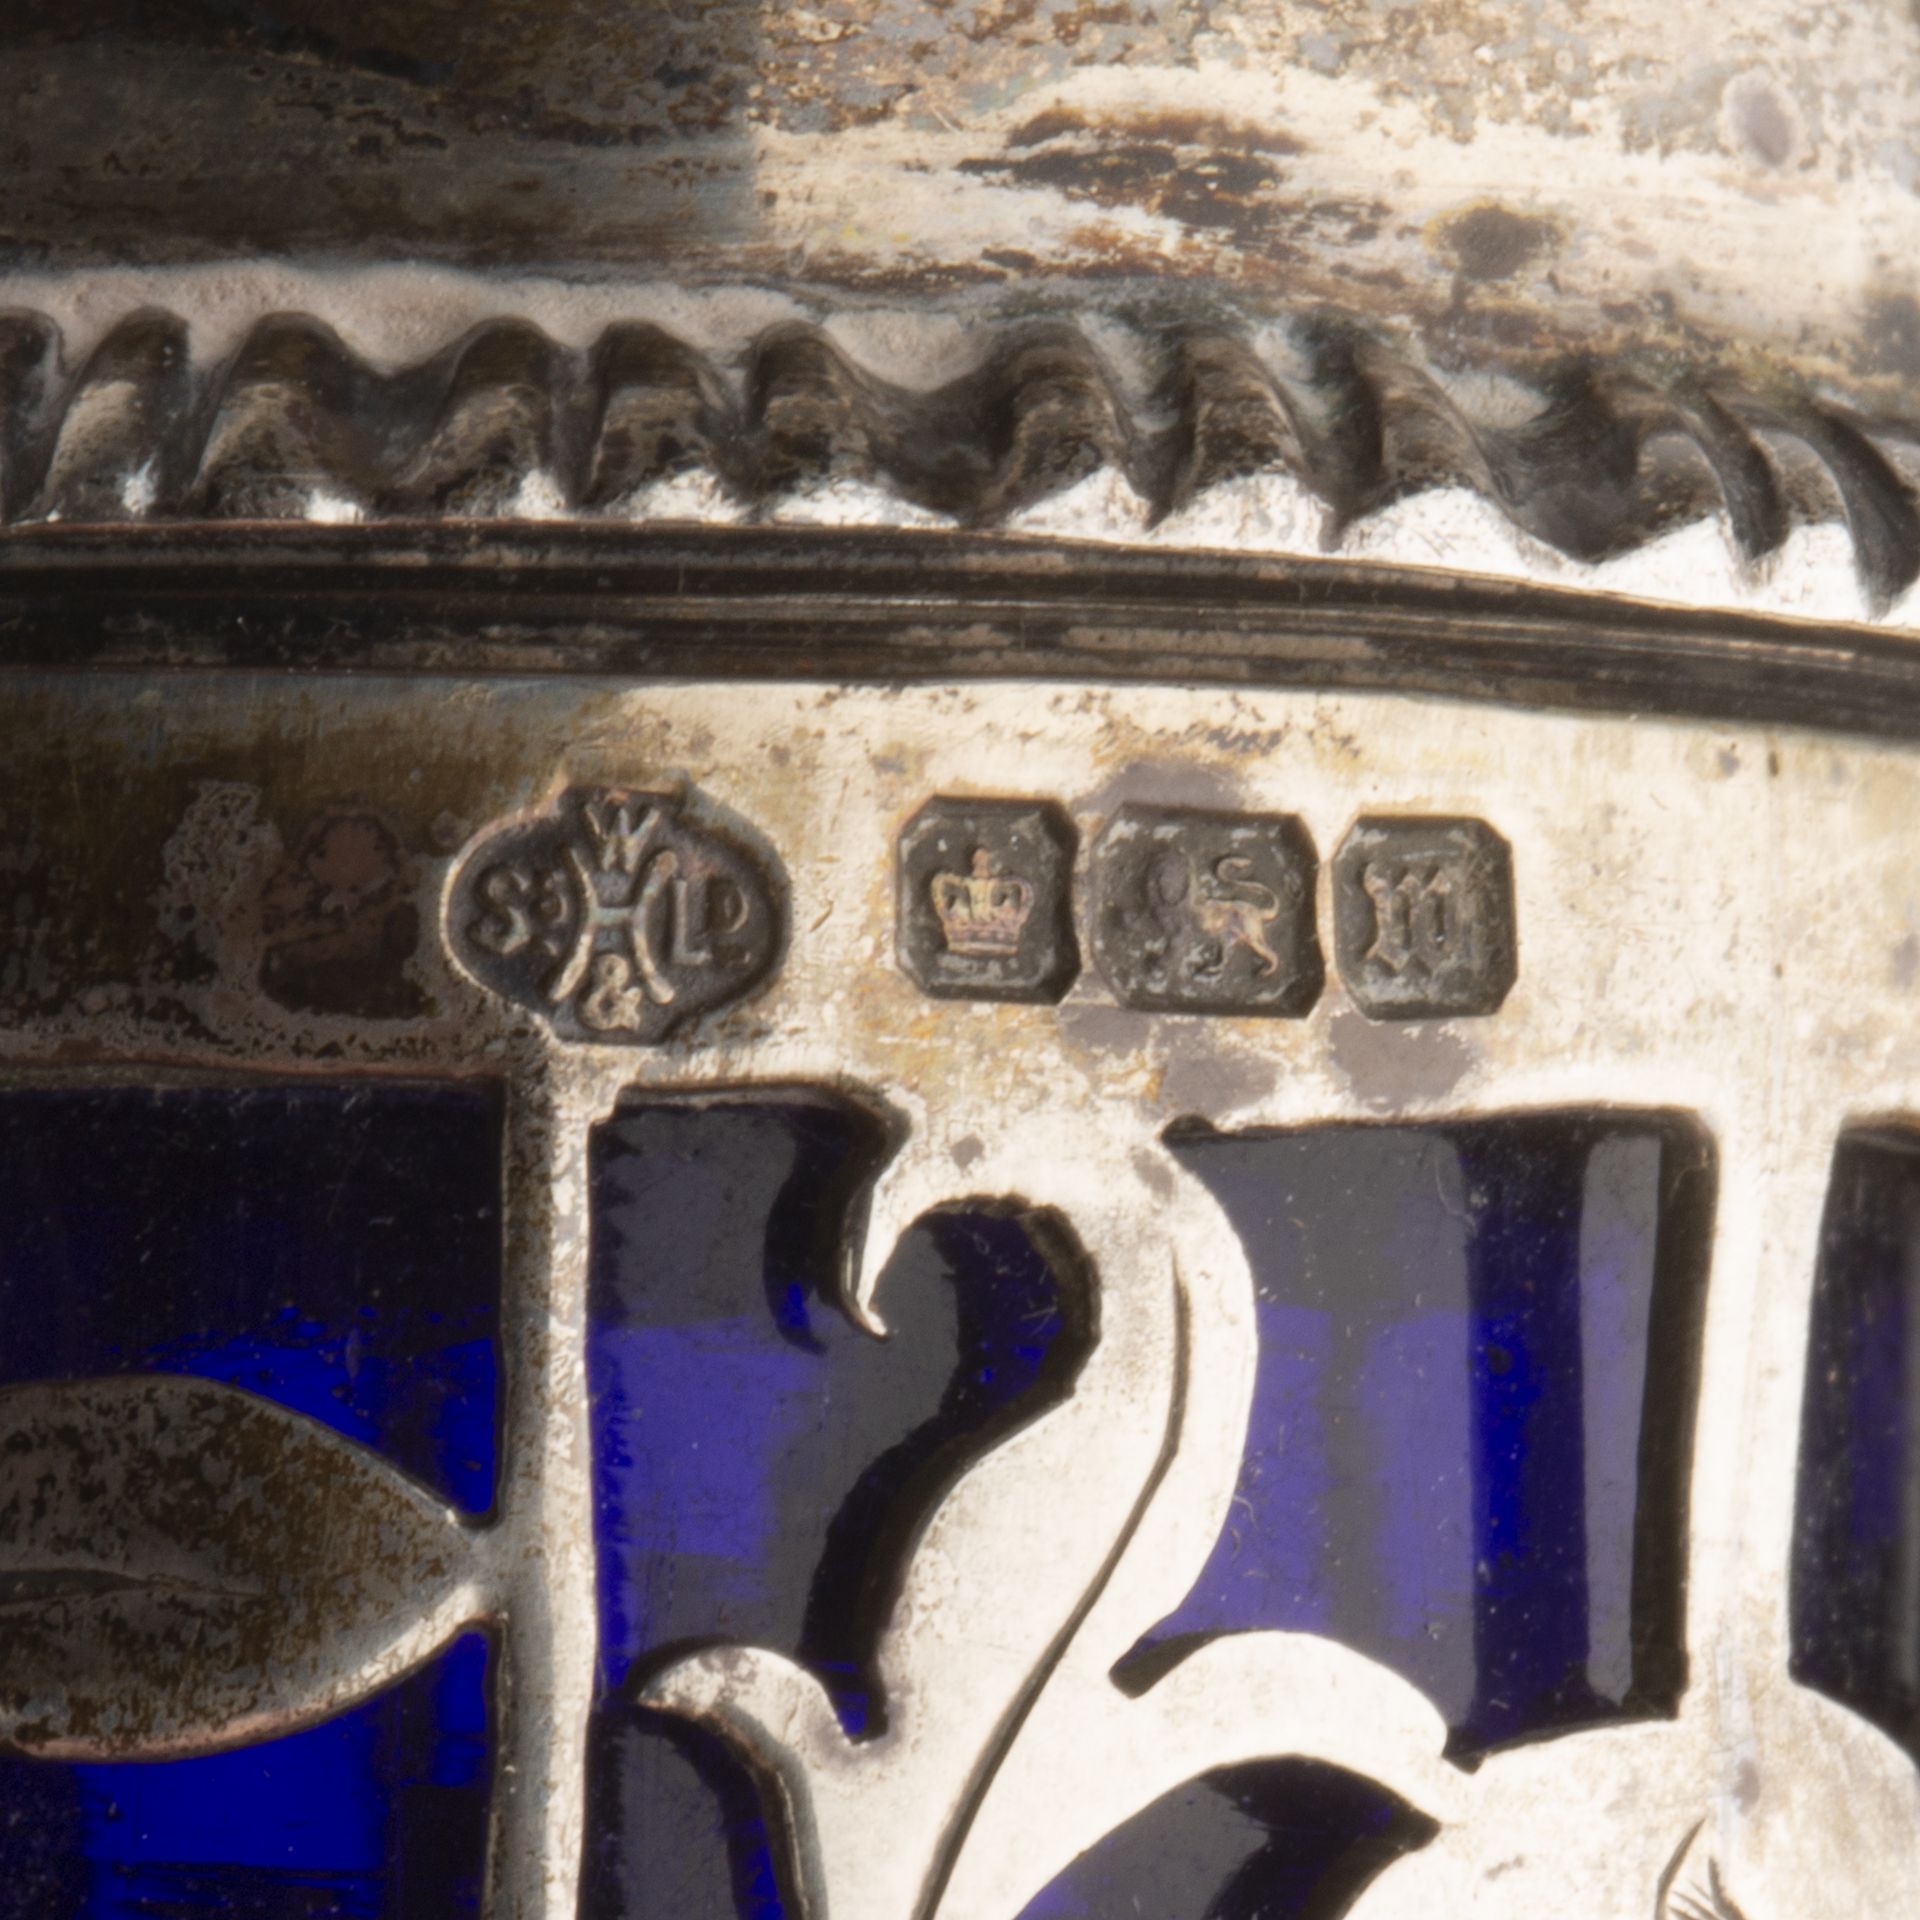 Pair of Edward VII silver pepperettes with pierced decoration of birds and foliage, with blue - Image 4 of 4